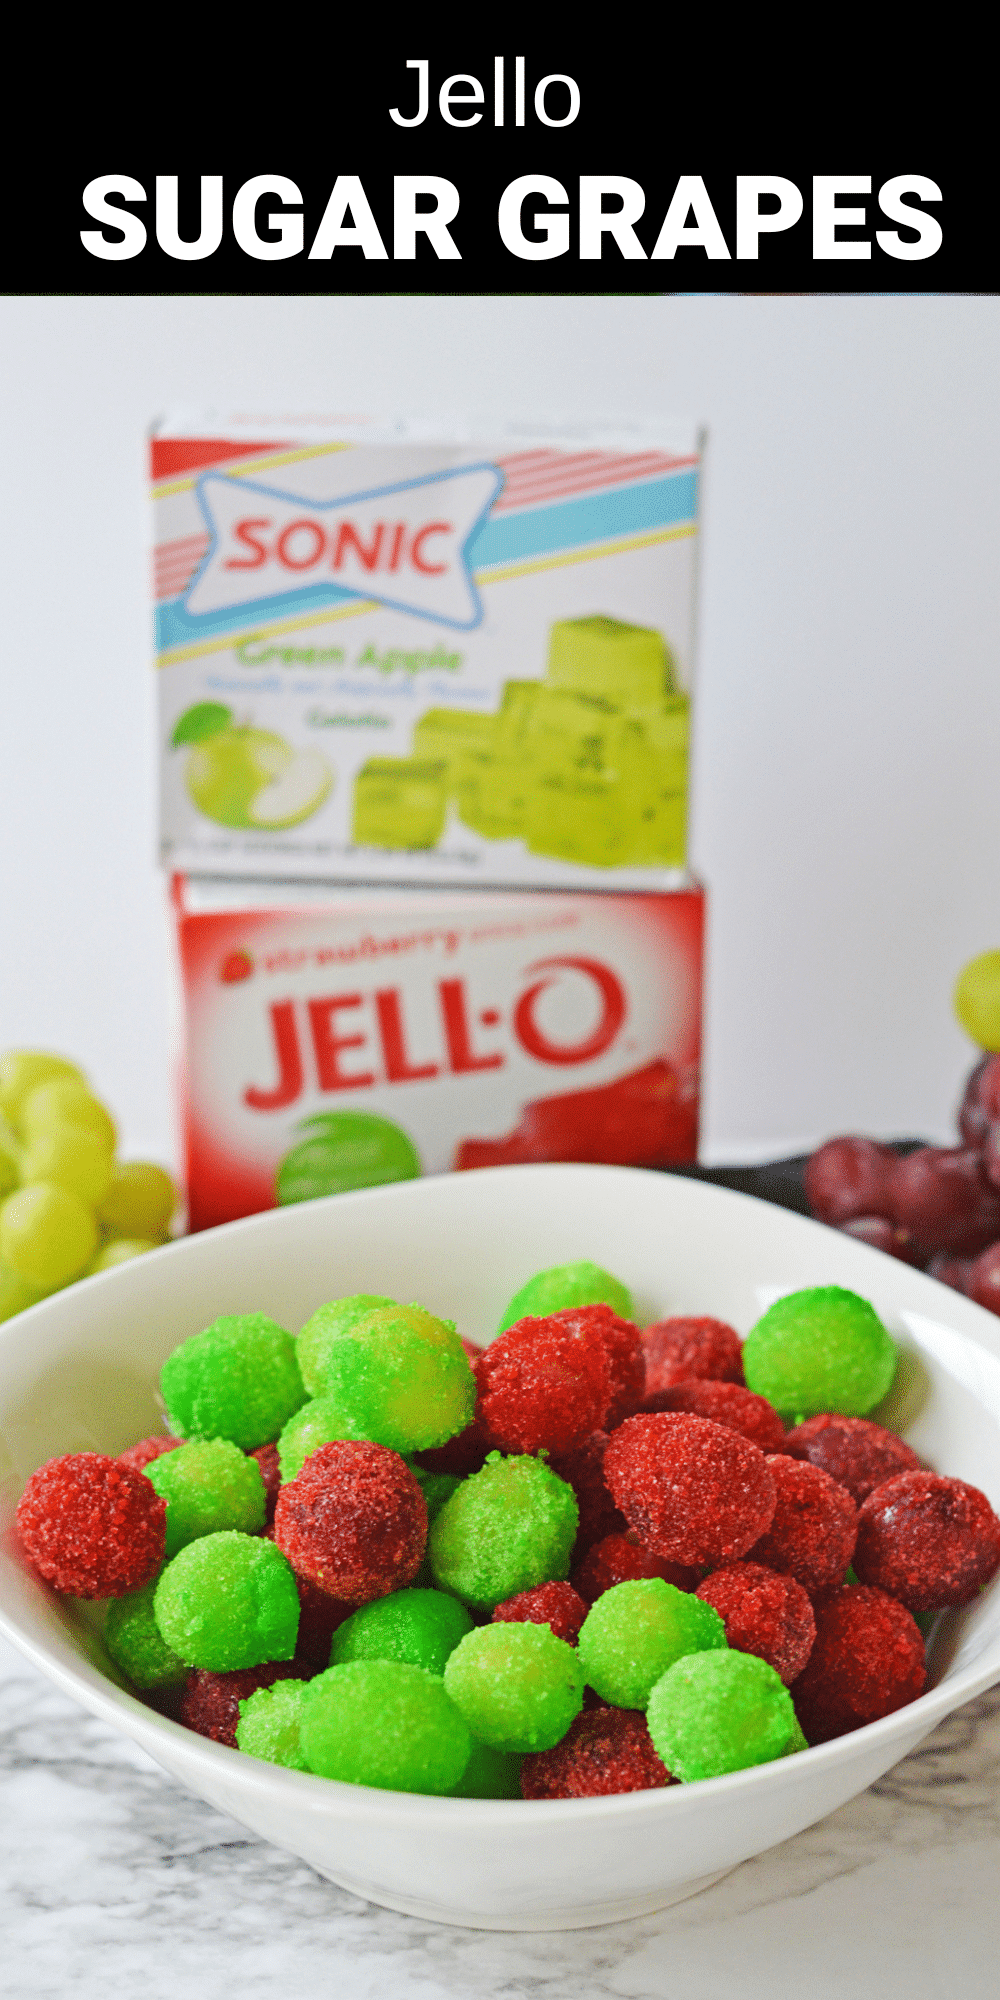 These frozen grapes with hello are the perfect easy and fun treat that the whole family will love. Fresh grapes are coated in sweet and fruity Jello powder and placed in the freezer to turn an ordinary fruit into a tasty frozen dessert!